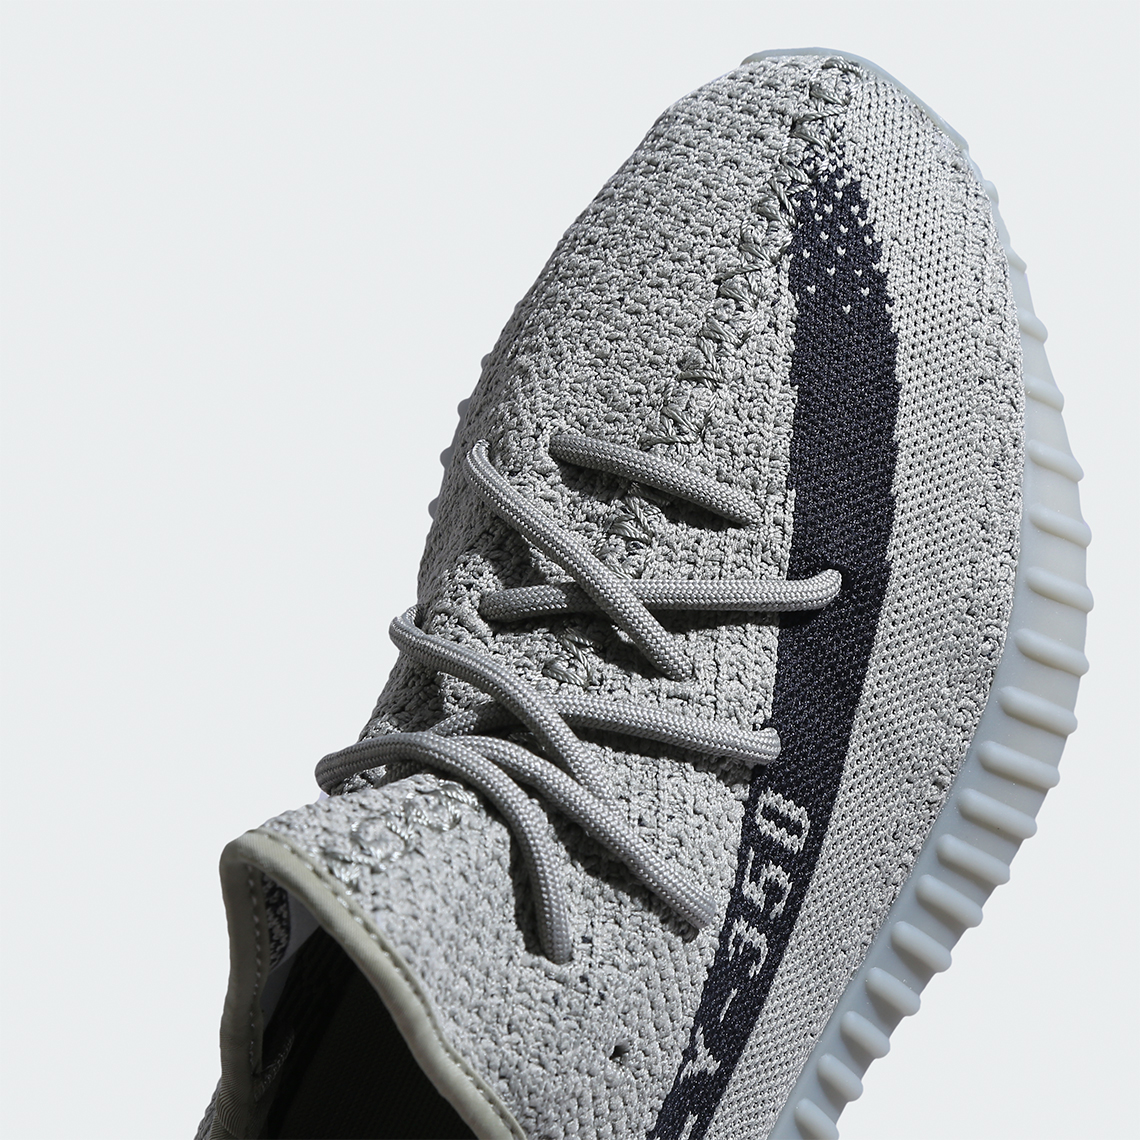 Adidas Yeezy Boost 350 V2 Granite Hq2059 Release Date 2